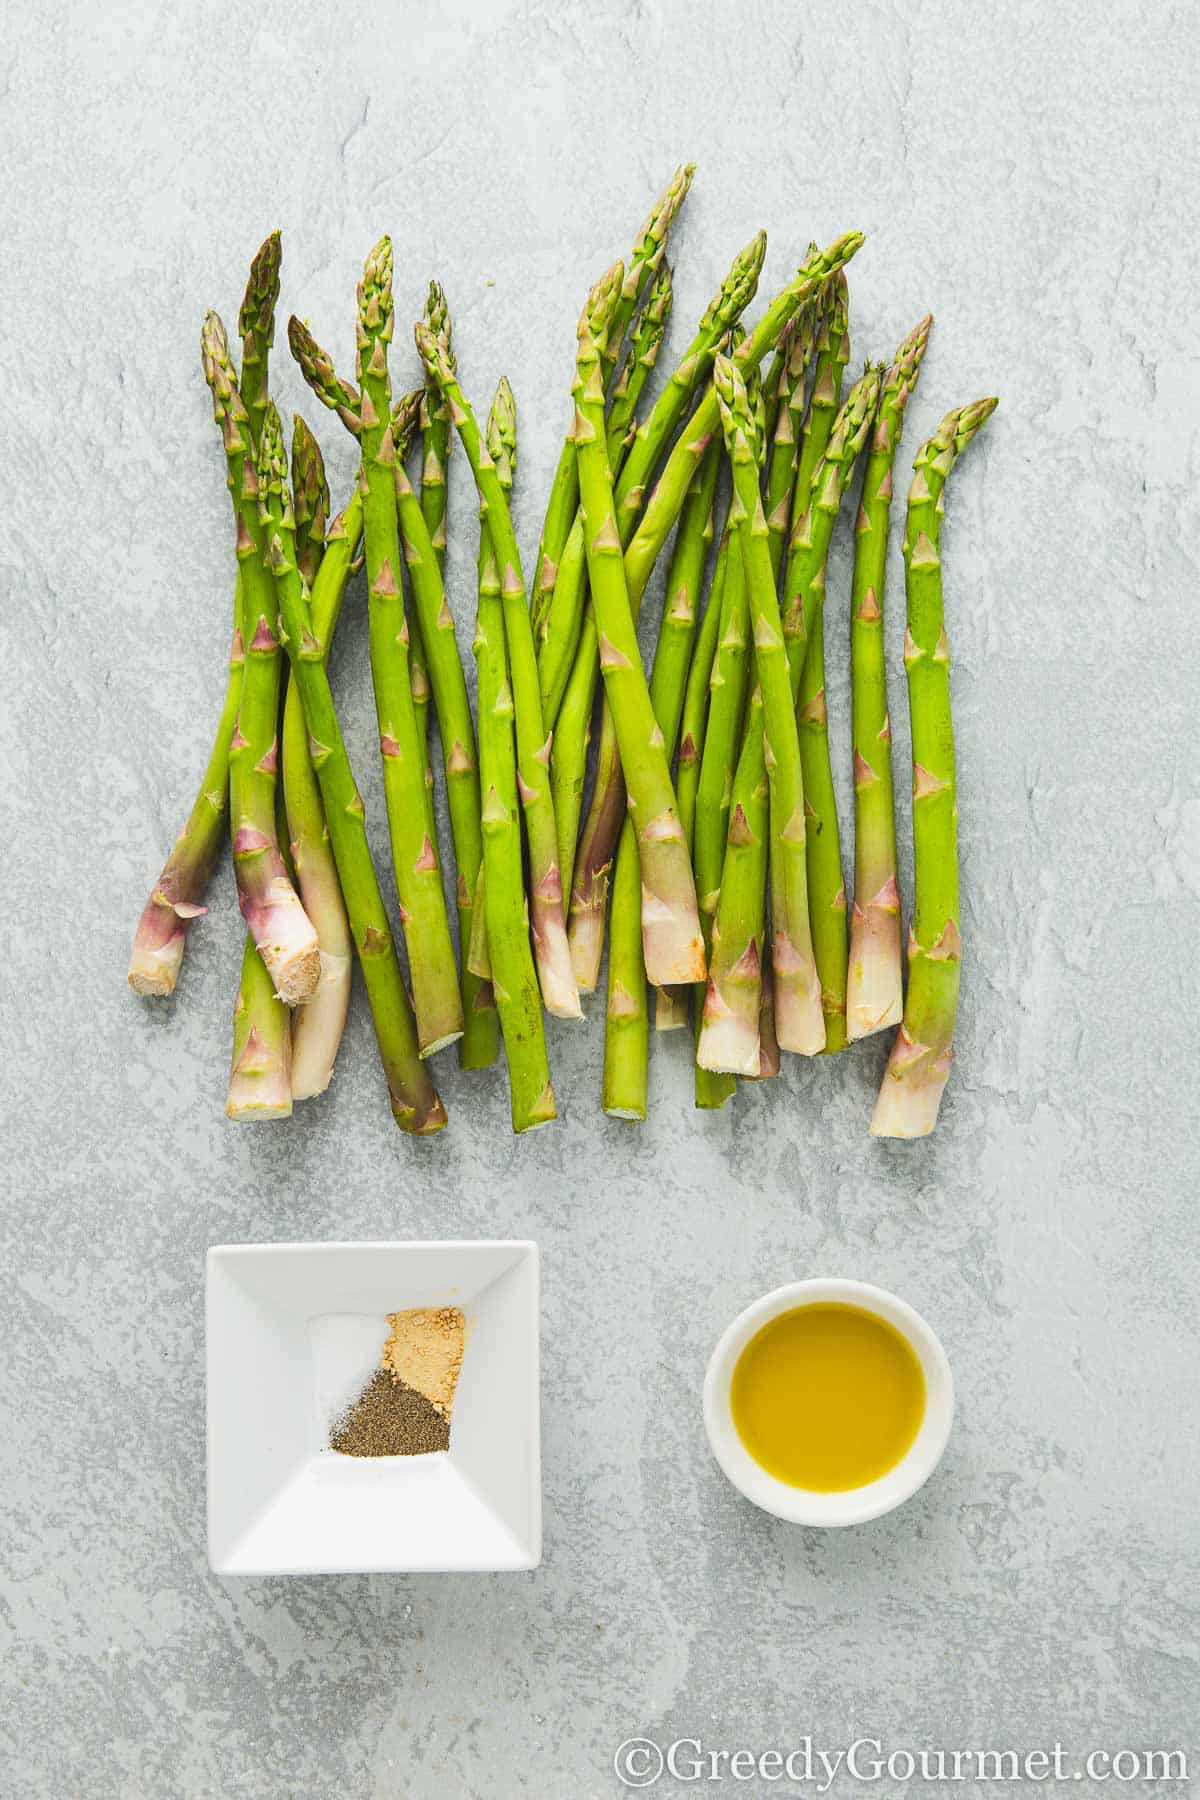 Asparagus next to bowls of seasoning and oil.